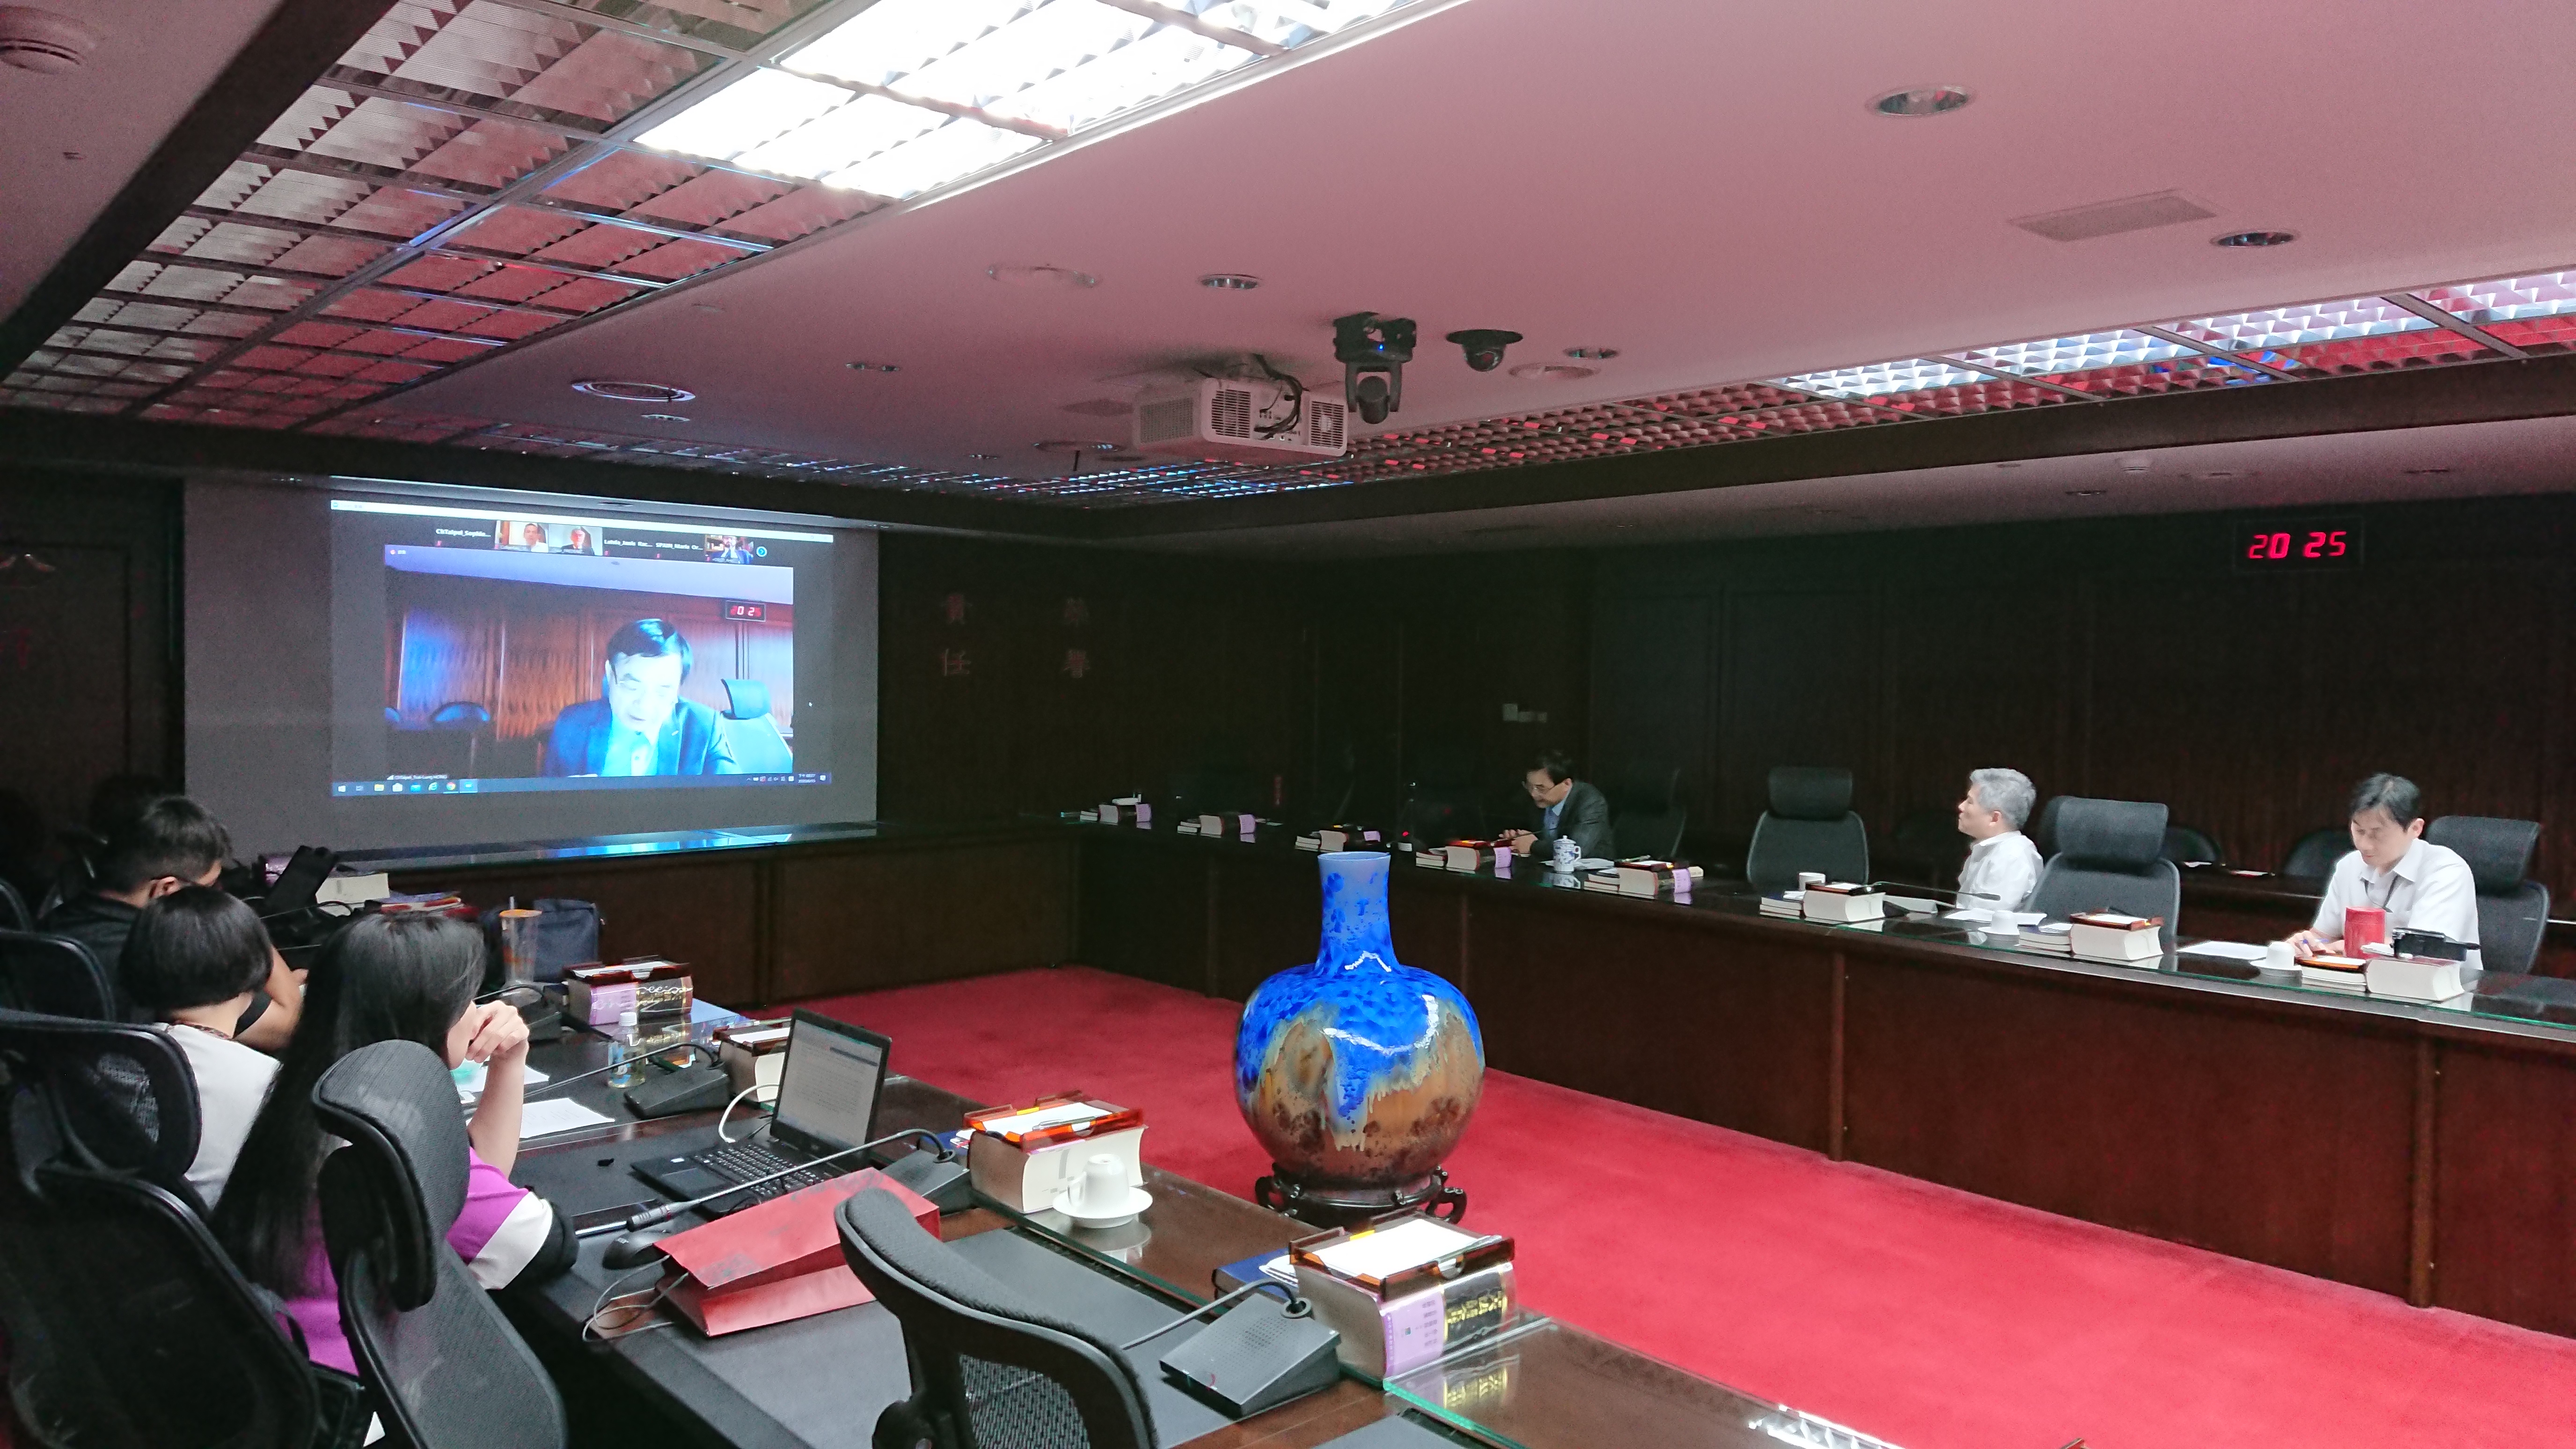 On. Jun. 15, Commissioner Hong Tsai-Lung gave a speech during the “Competition Policy during the COVID-19 Period” videoconference held by the OECD Competition Committee